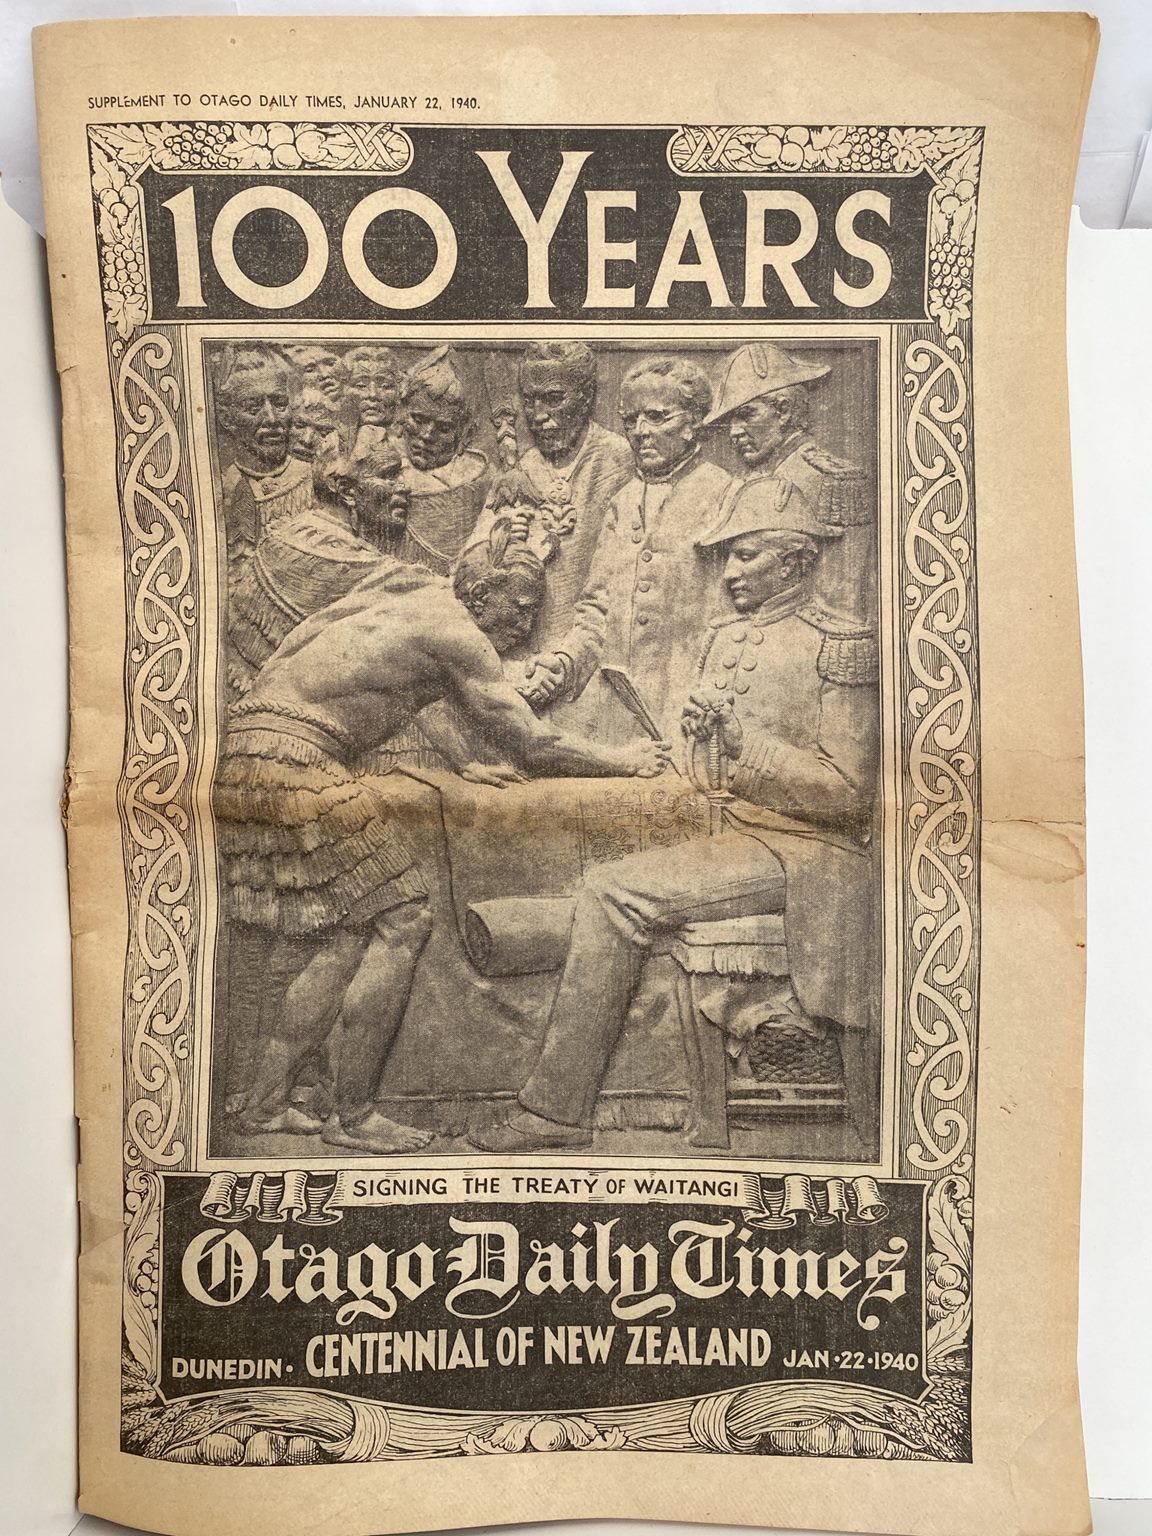 OLD NEWSPAPER: The Otago Daily Times 1840 - 1940 Centennial of New Zealand